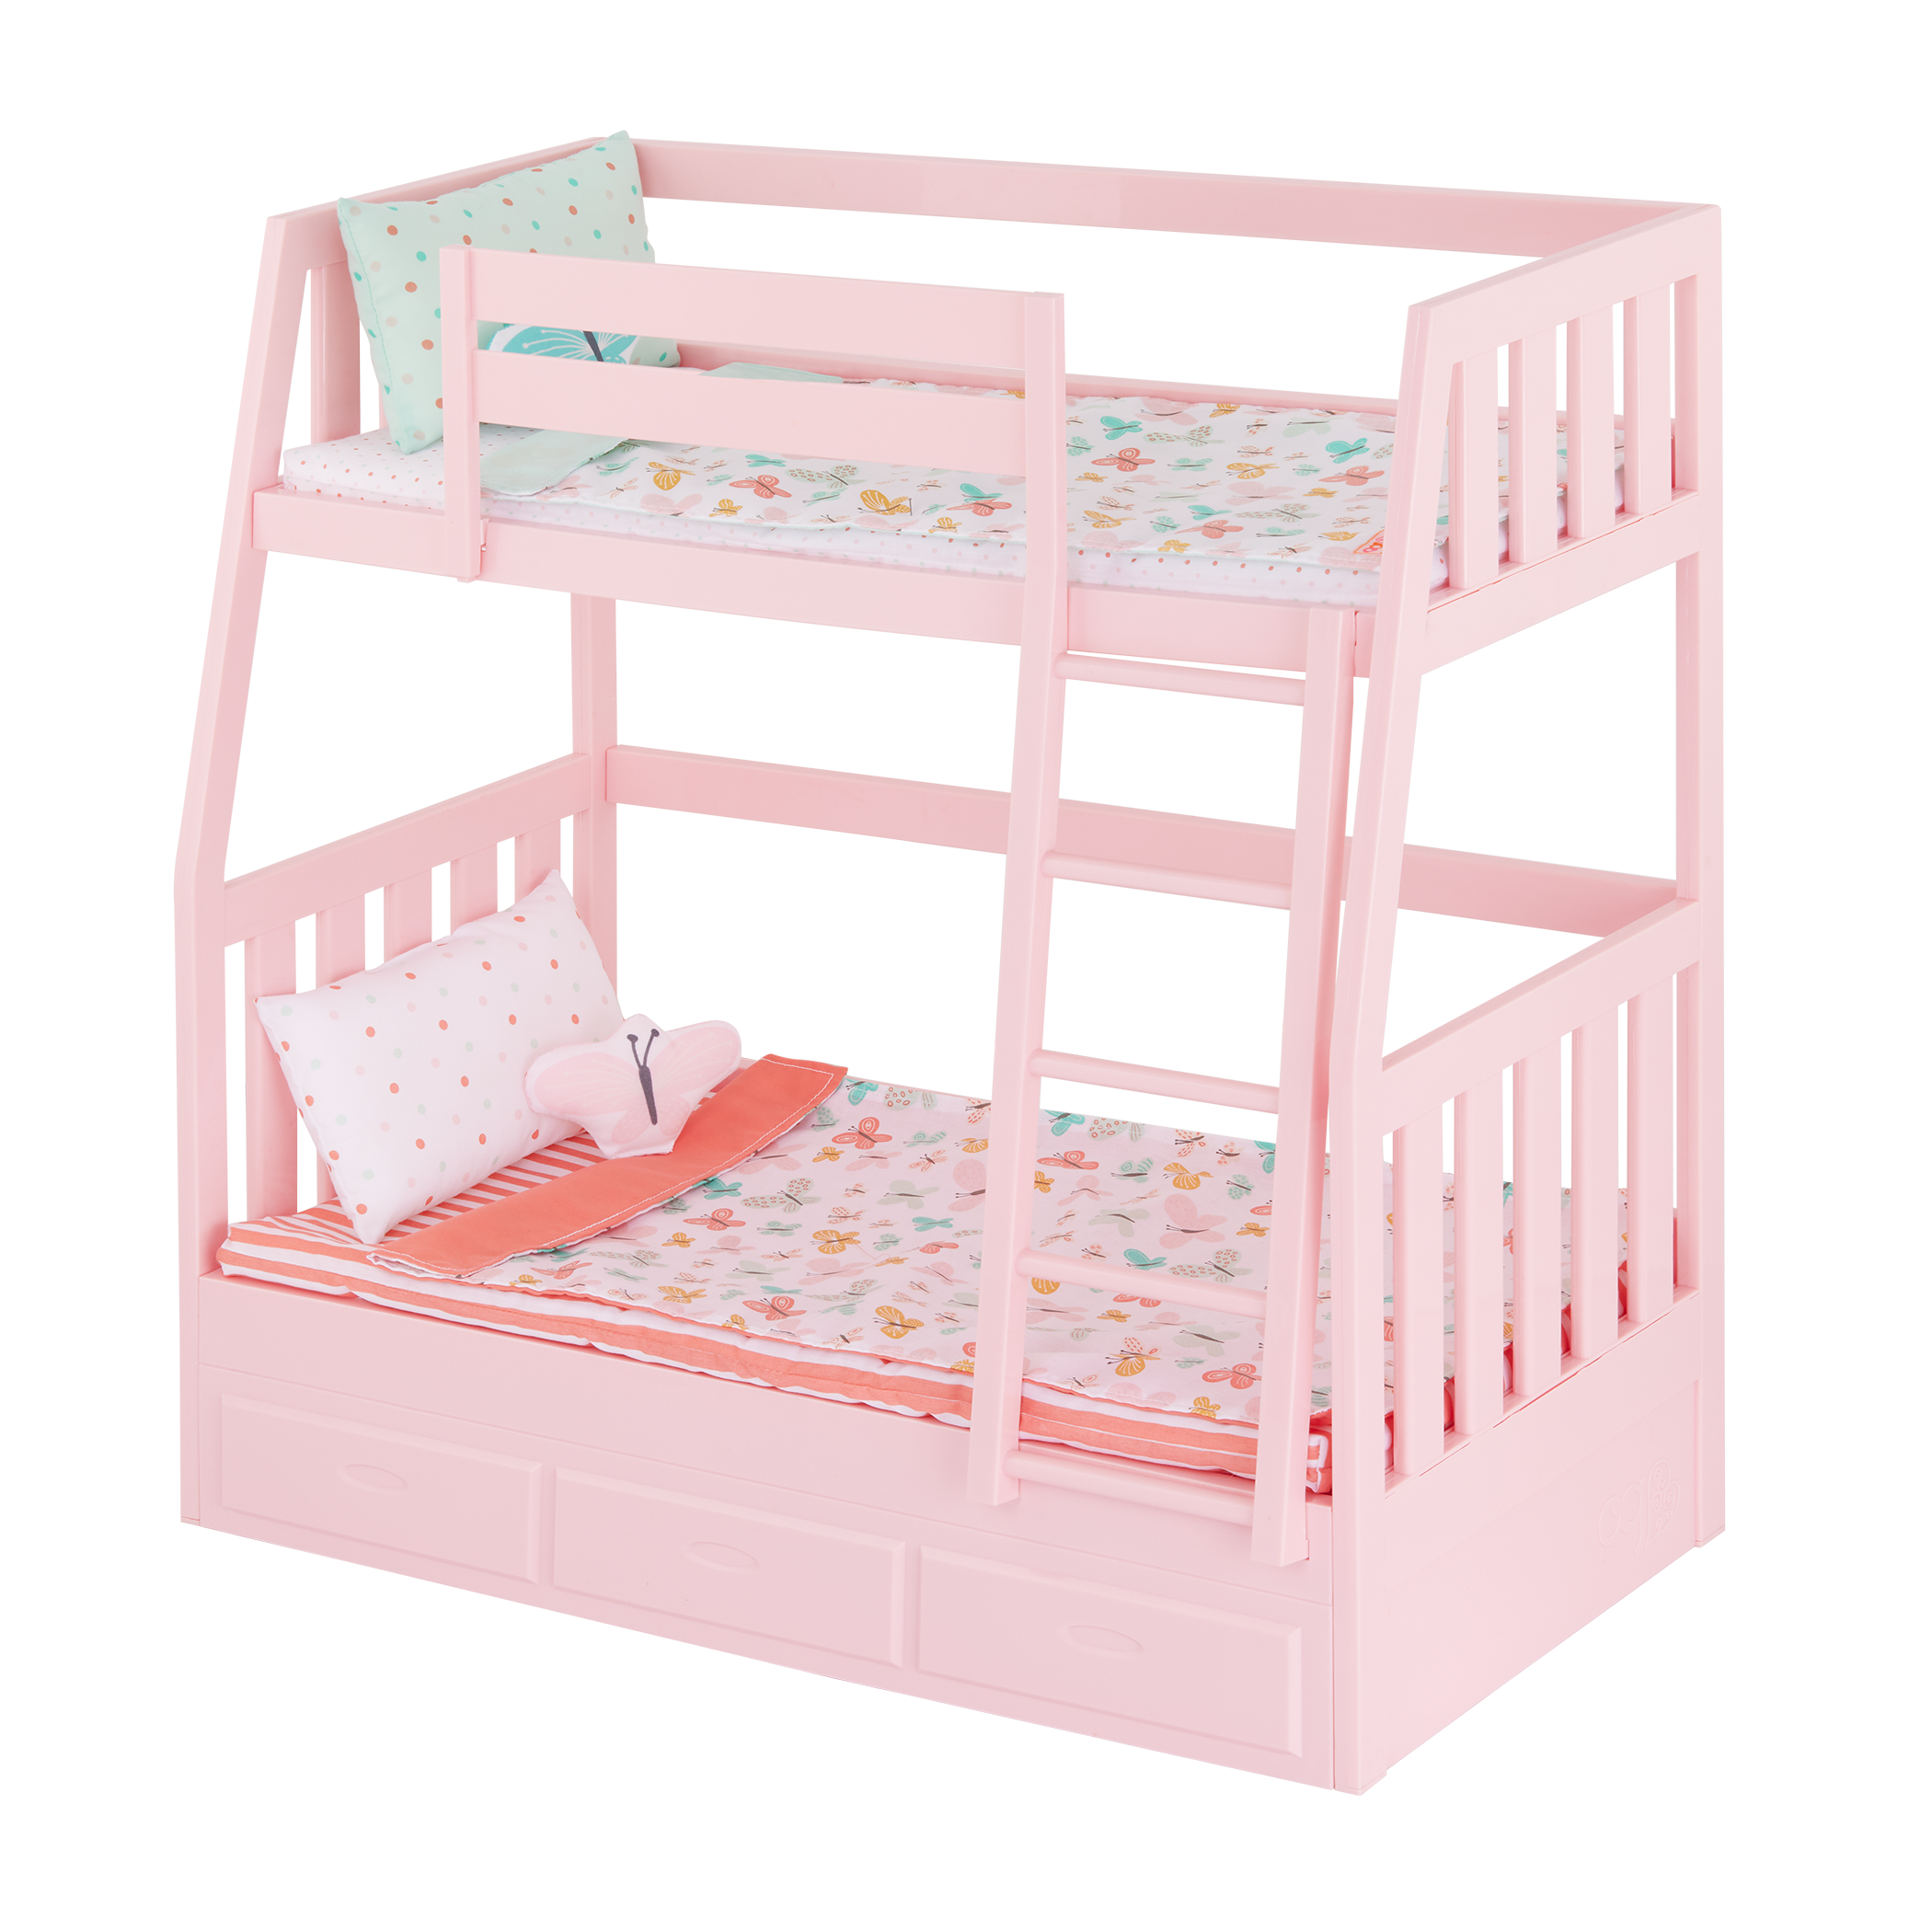 Our Generation Dreams for Two Bunk Bed Set for 18-inch Dolls 